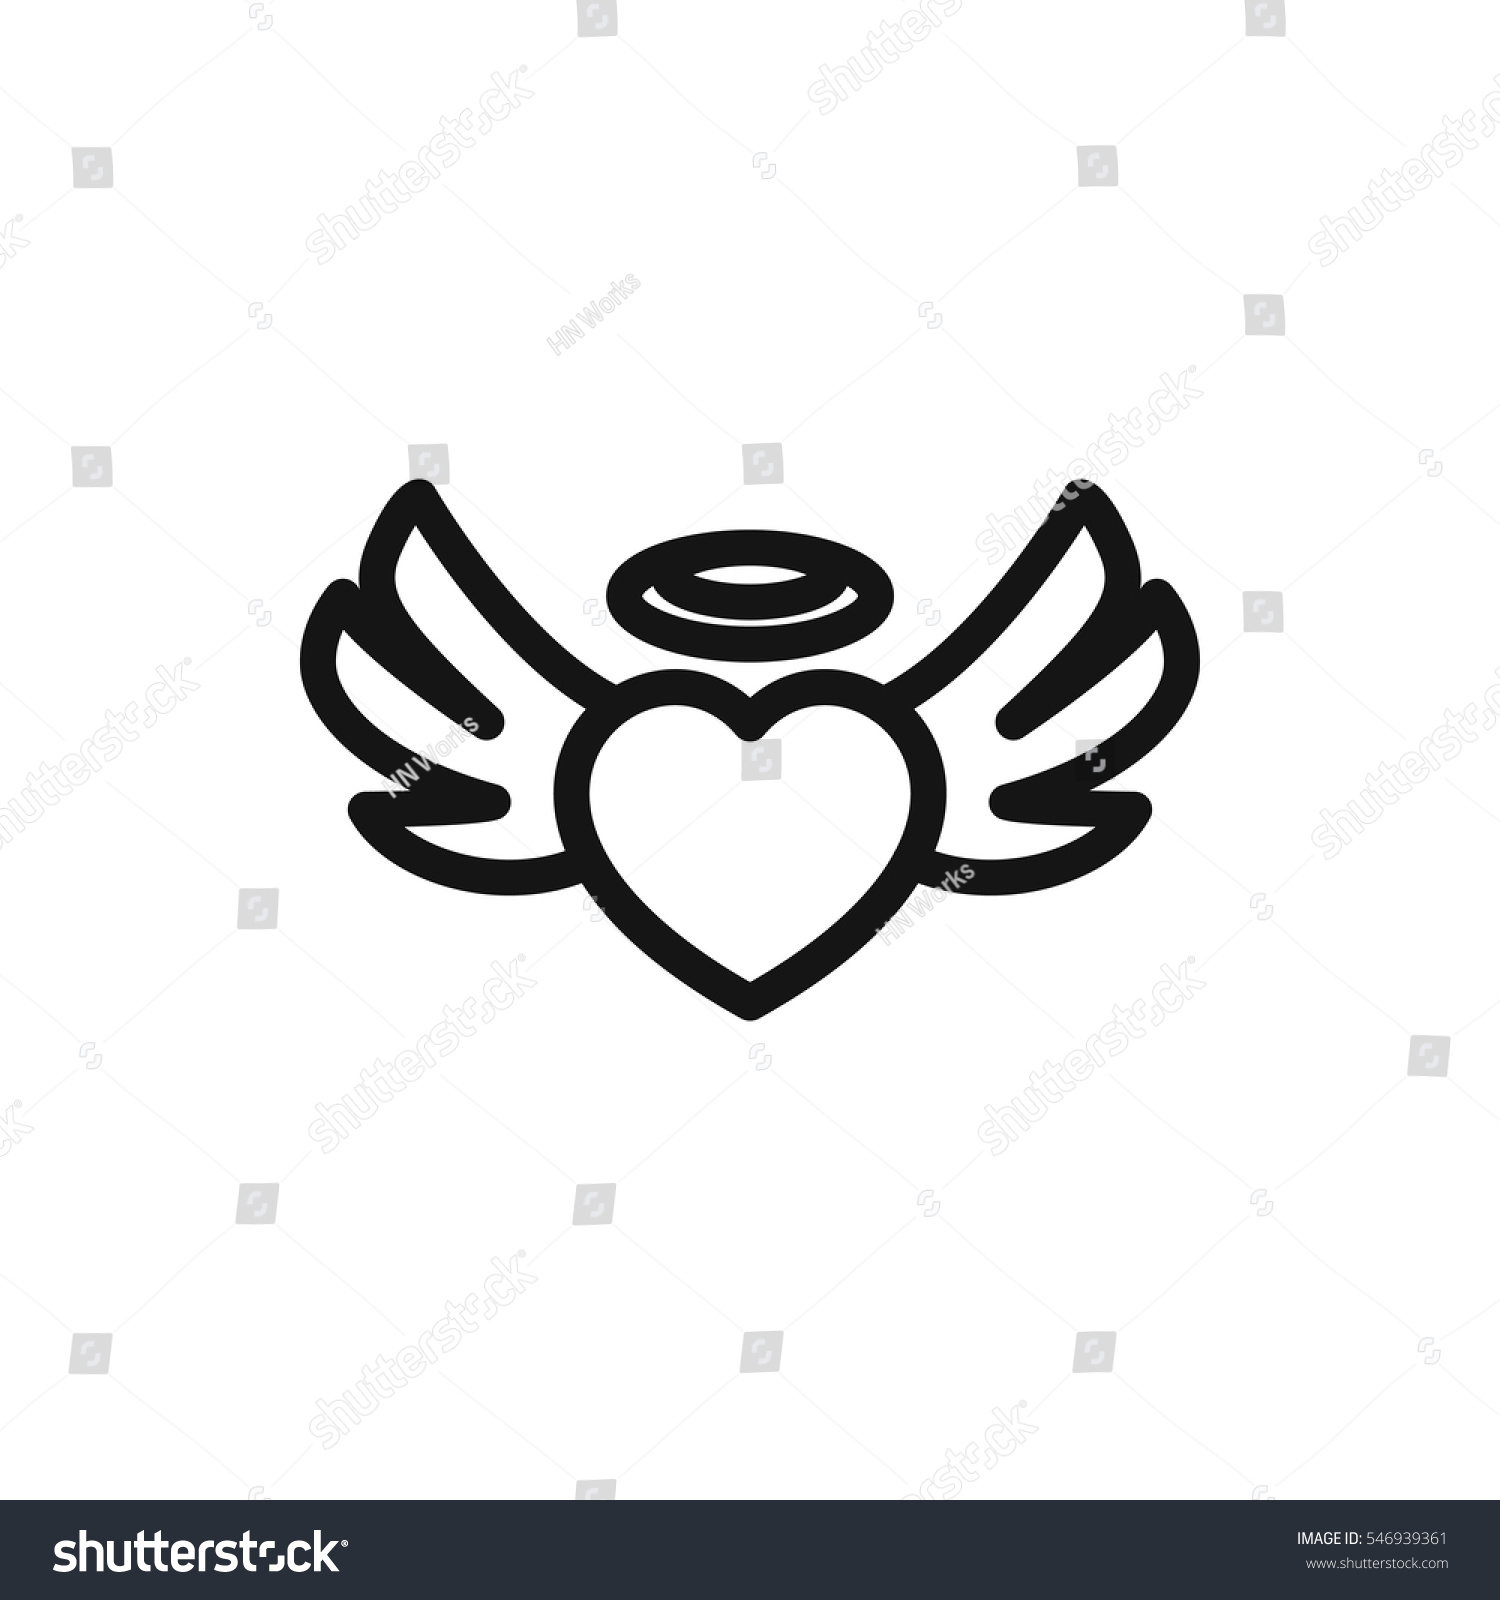 Heart Angel Wings Icon Illustration Isolated Stock Vector 546939361 ...